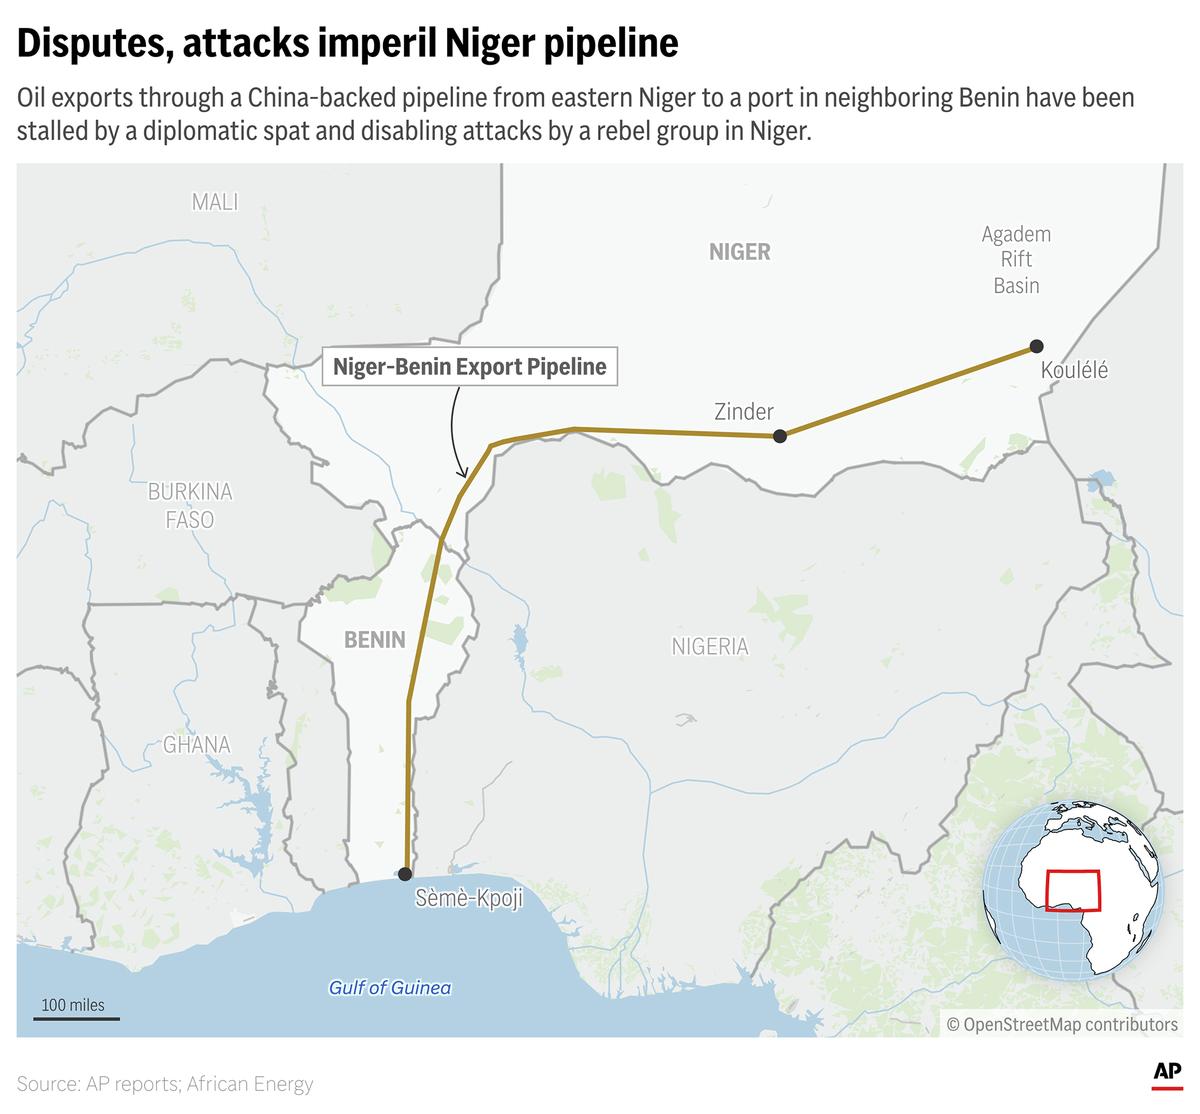 Attacks and diplomatic disputes are hampering oil flows through a China-backed pipeline running from Niger to Benin’s coast.